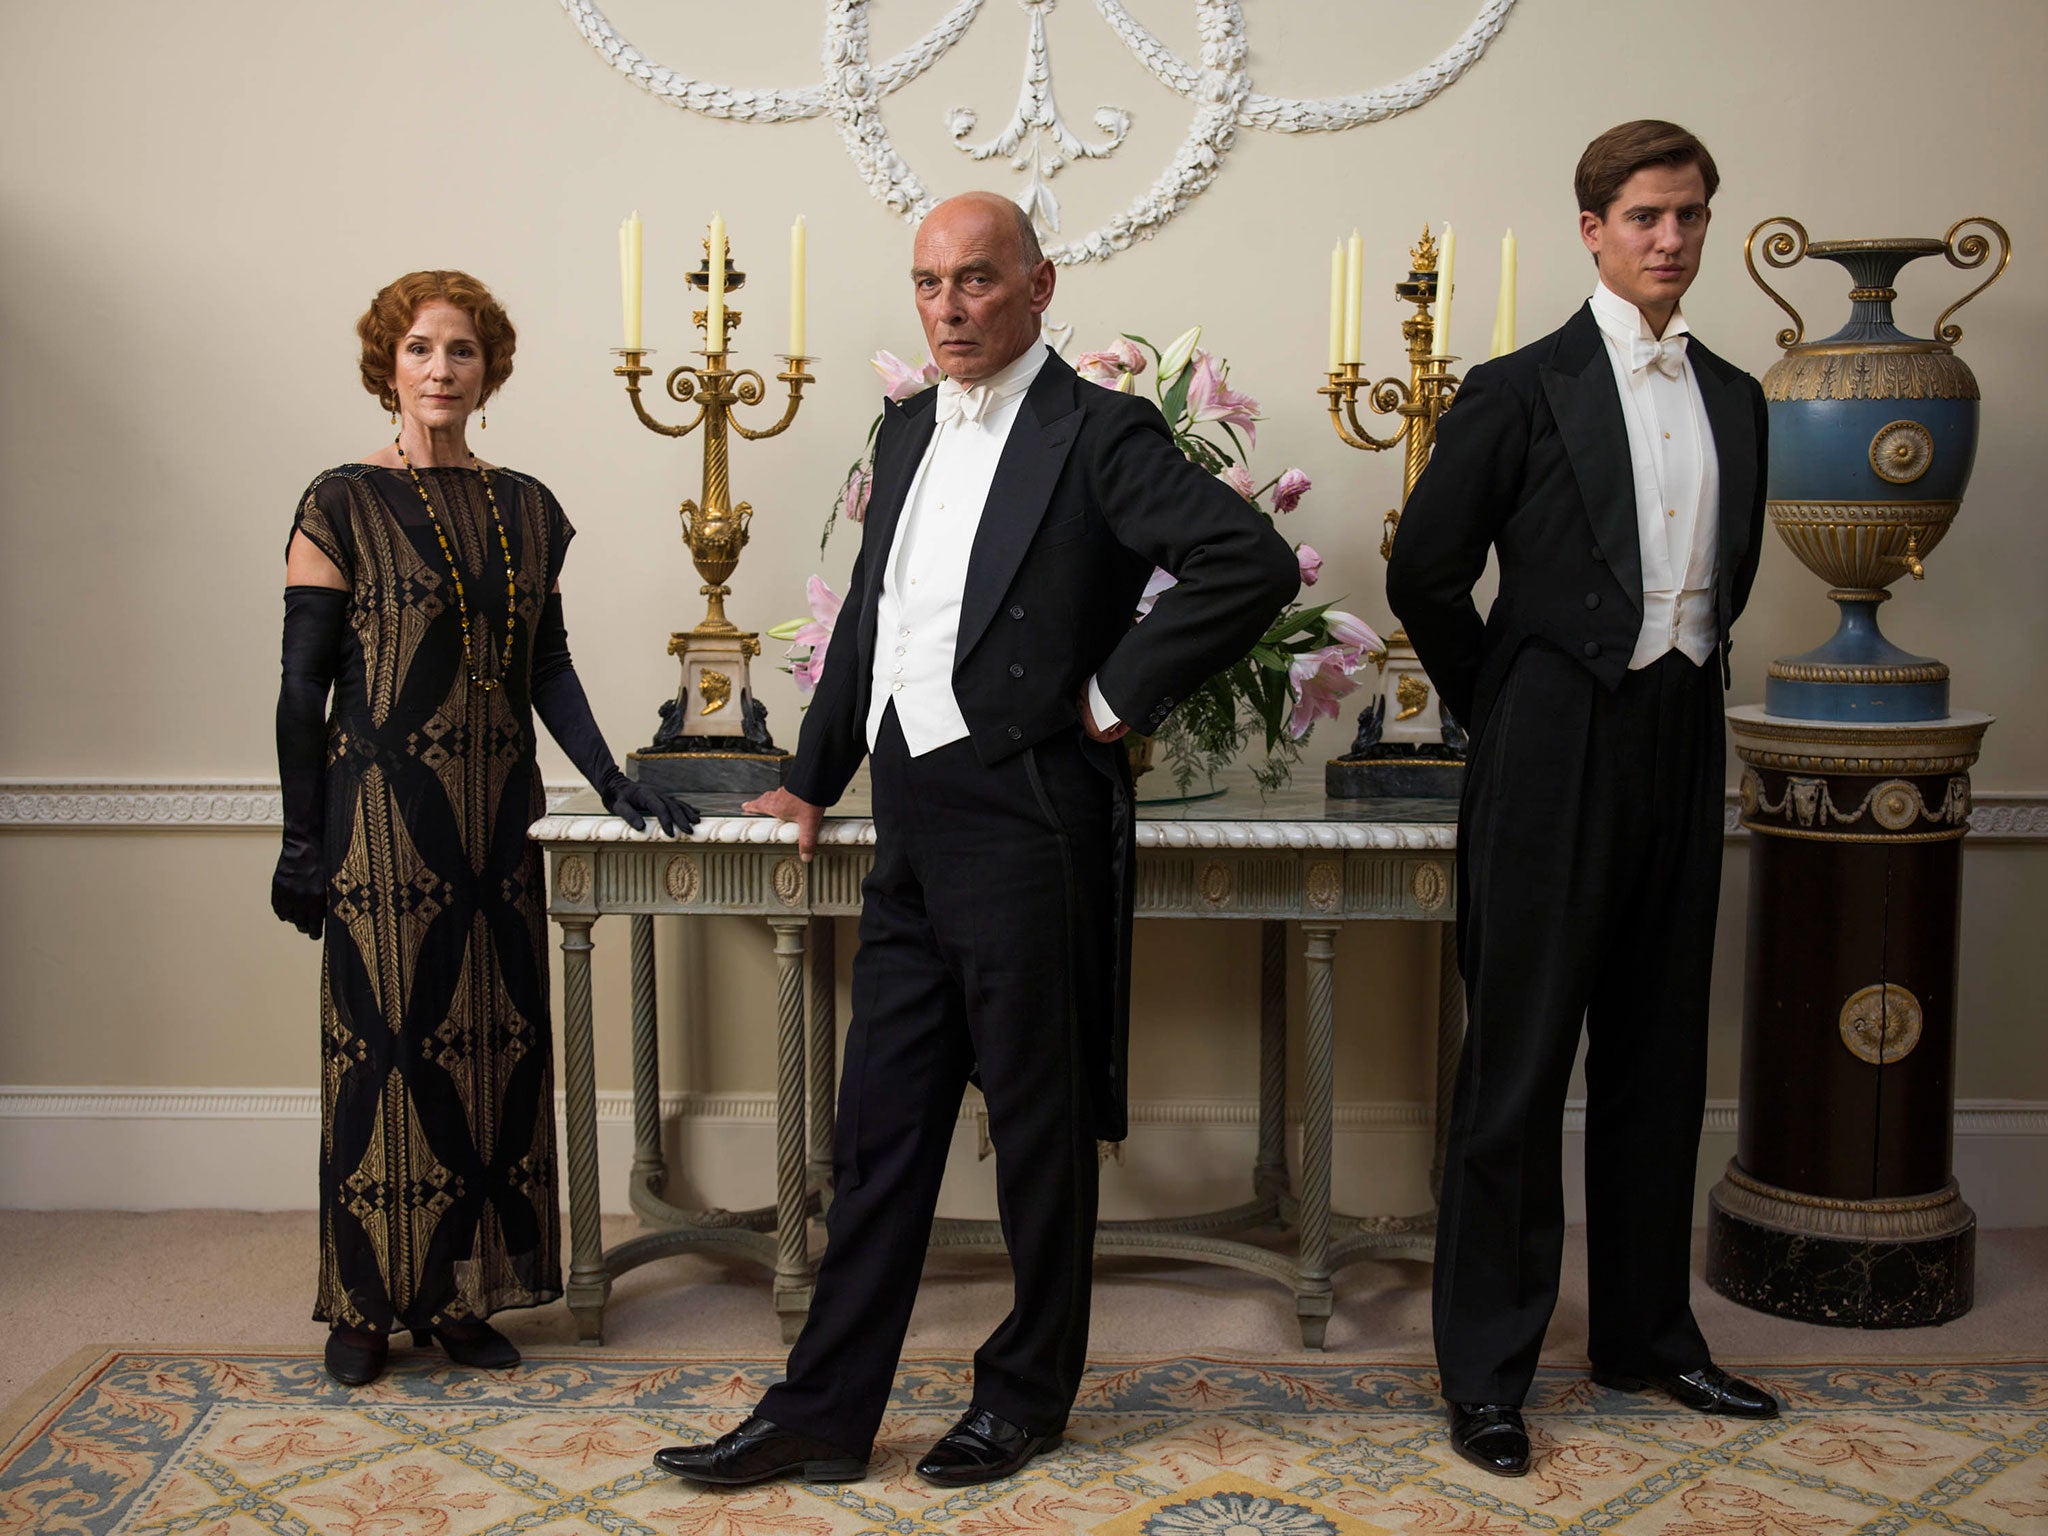 James Faulkner (centre) plays Lord Sinderby in Downton Abbey